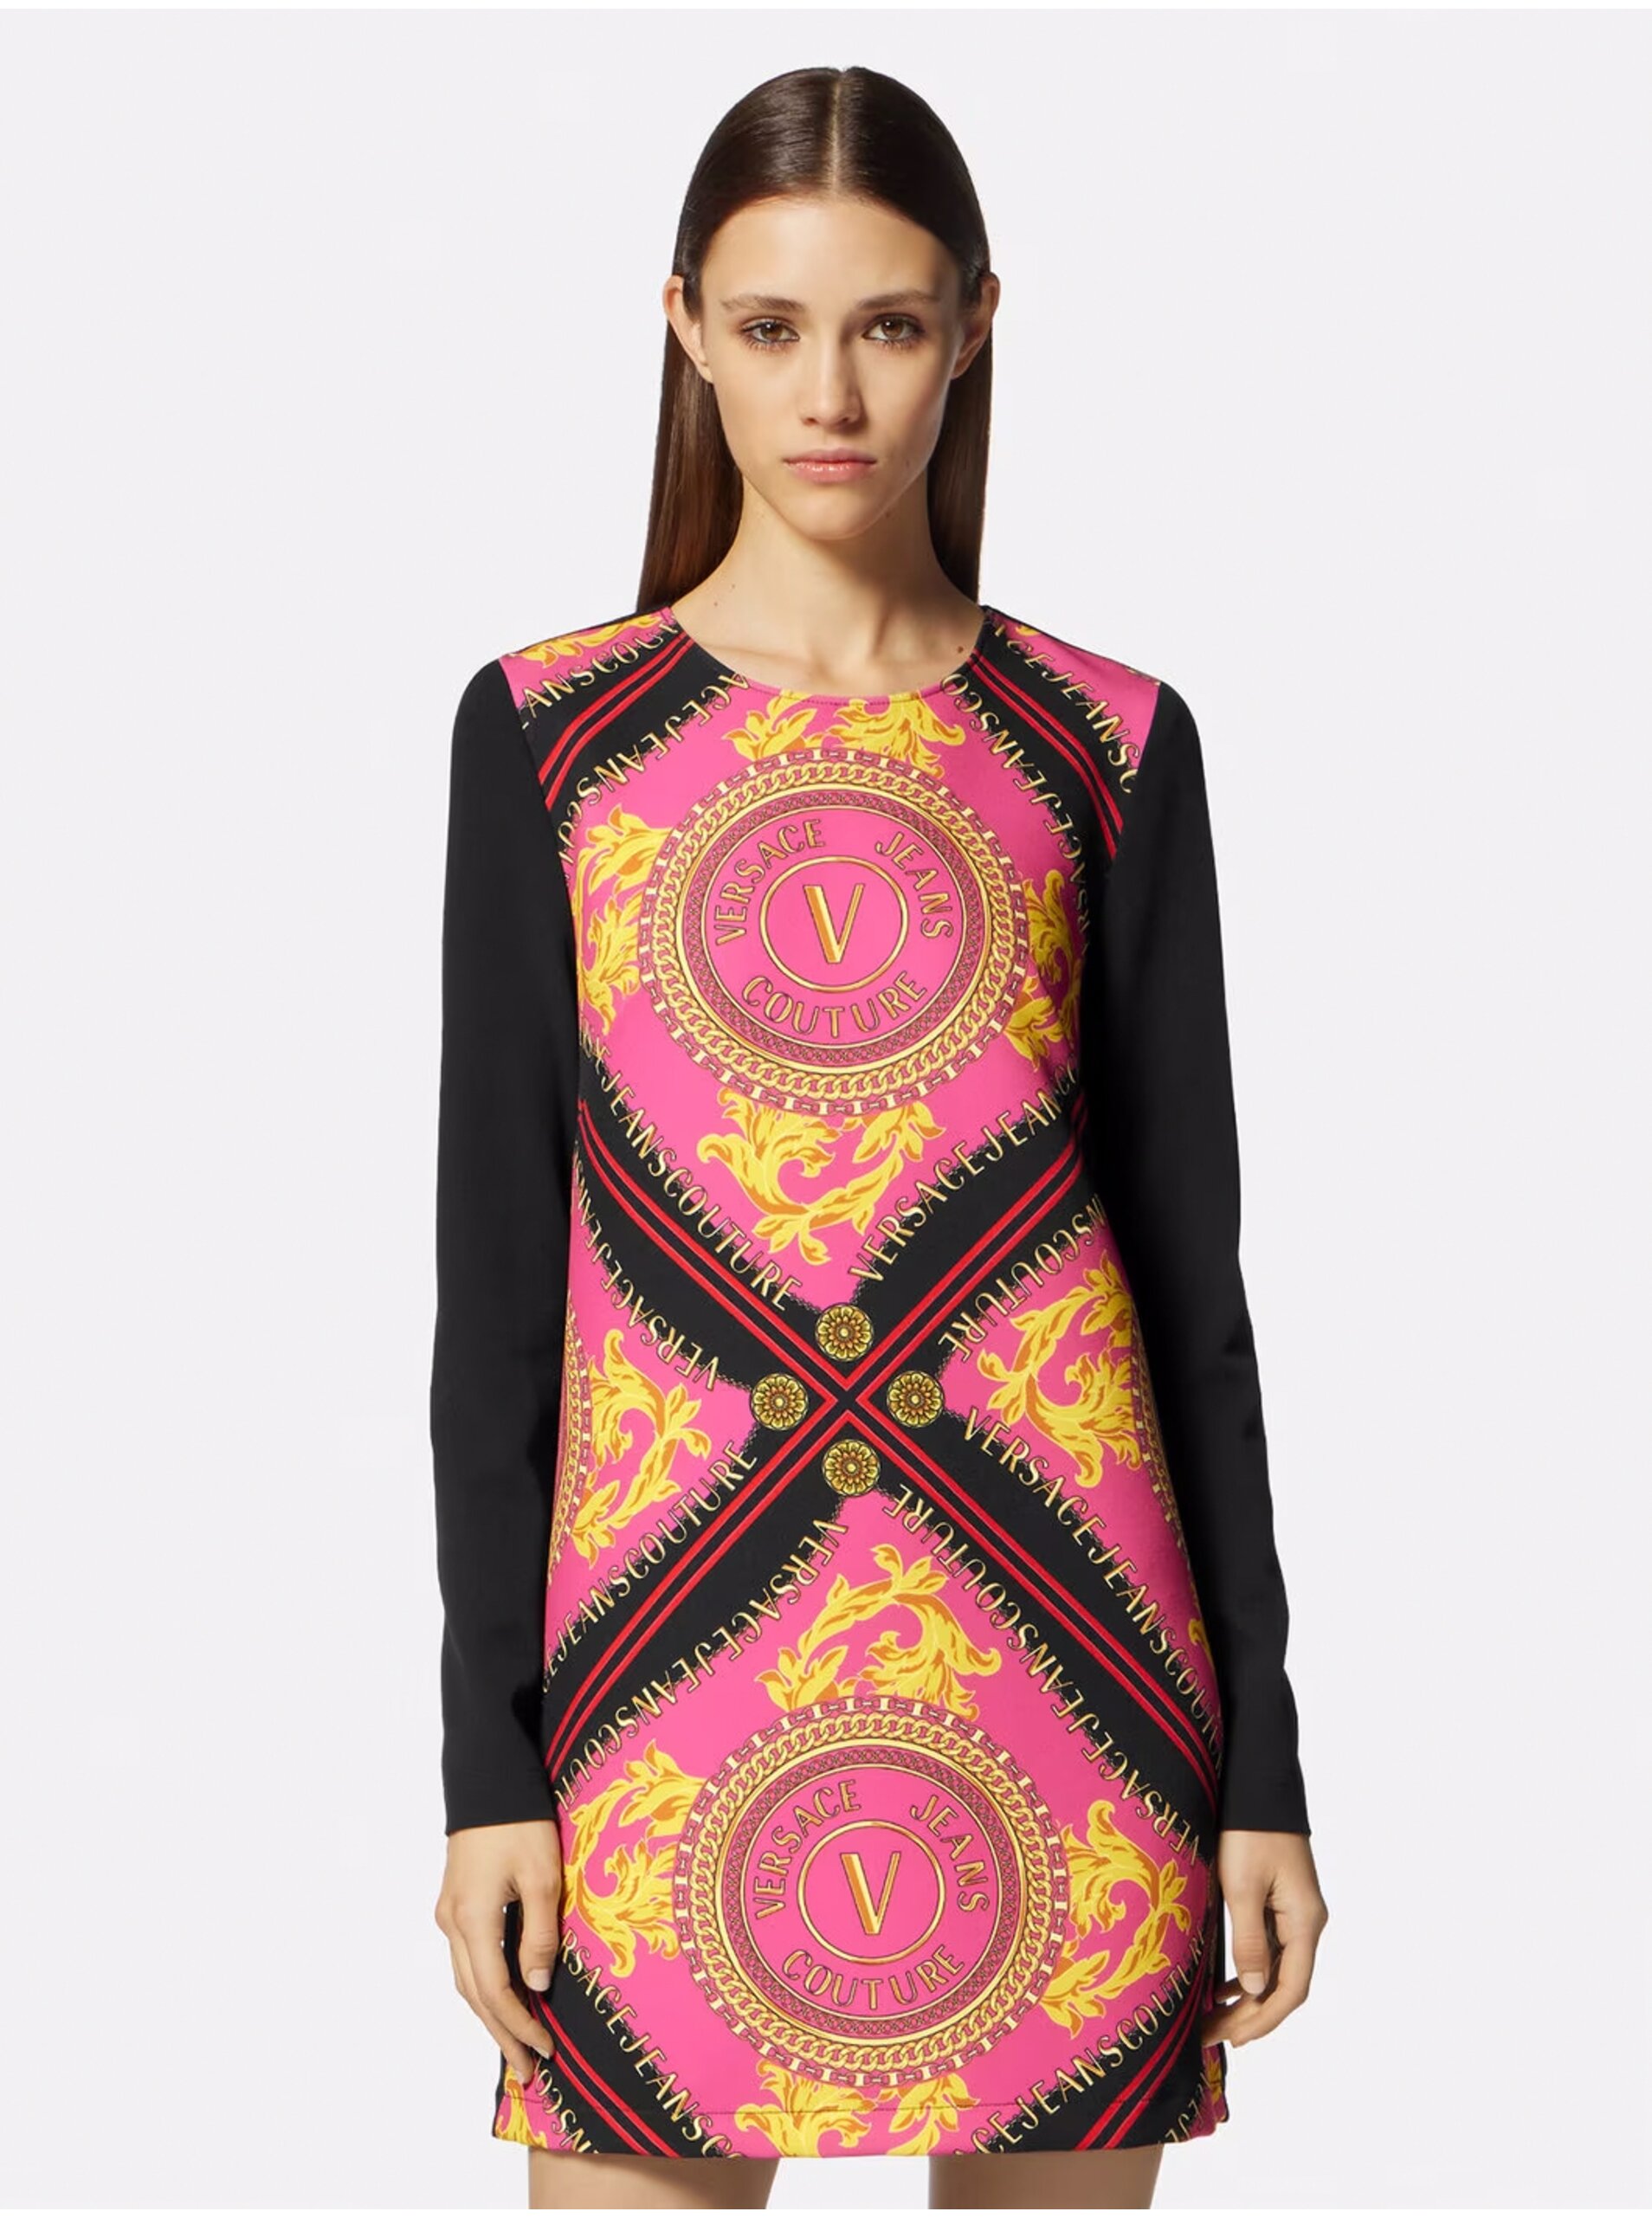 Black And Pink Women's Patterned Dress Versace Jeans Couture - Women